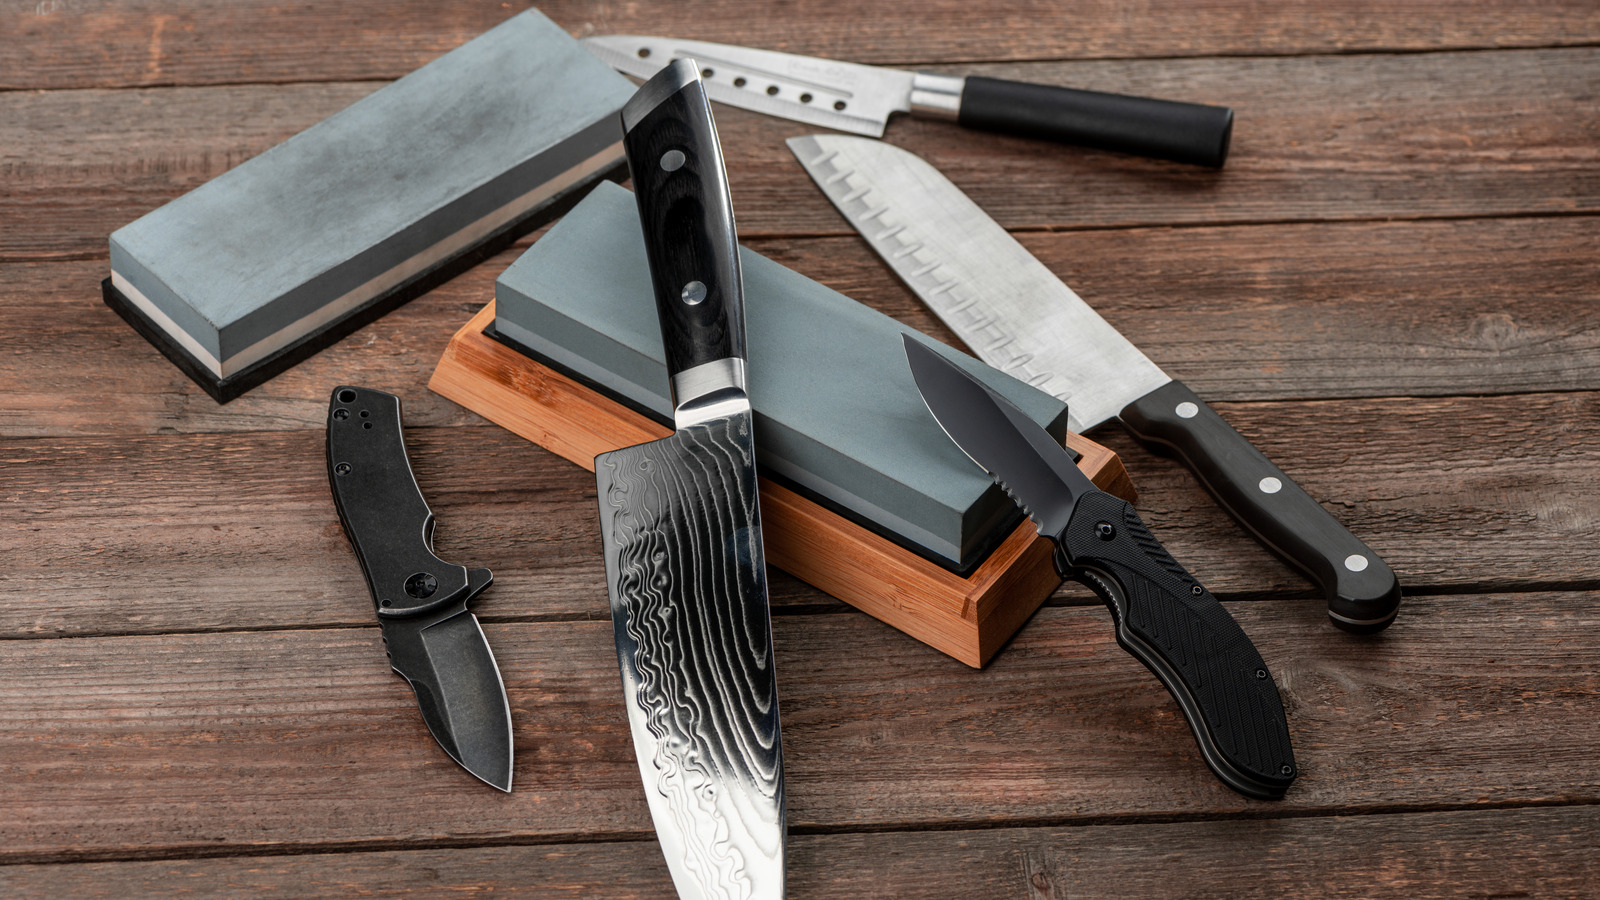 How To Sharpen a Kitchen Knife - Beginner's Guide to Knife Sharpening 